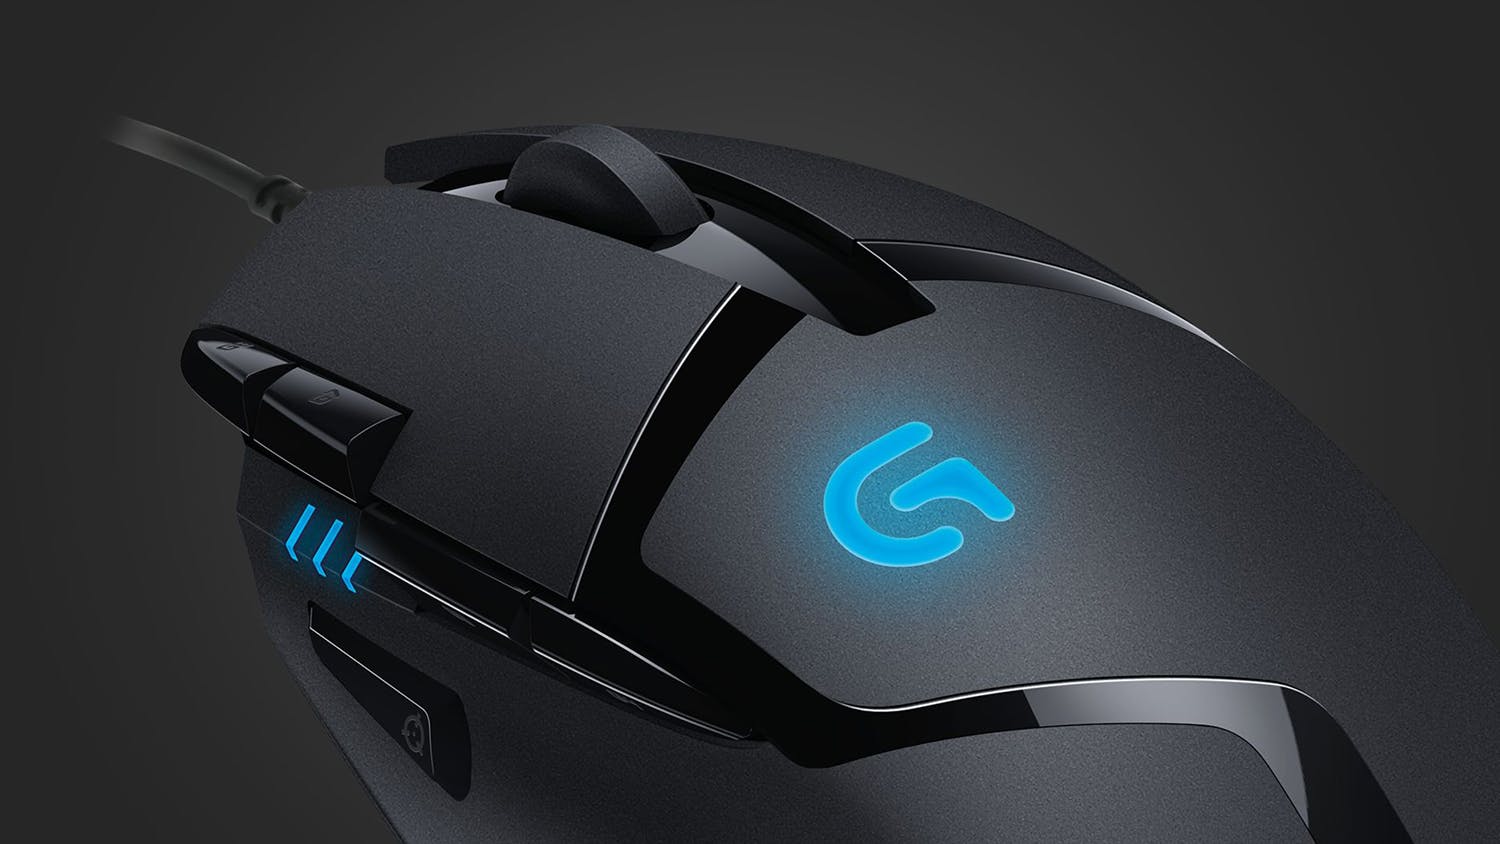 Logitech G402 Hyperion Fury FPS Wired Gaming Mouse